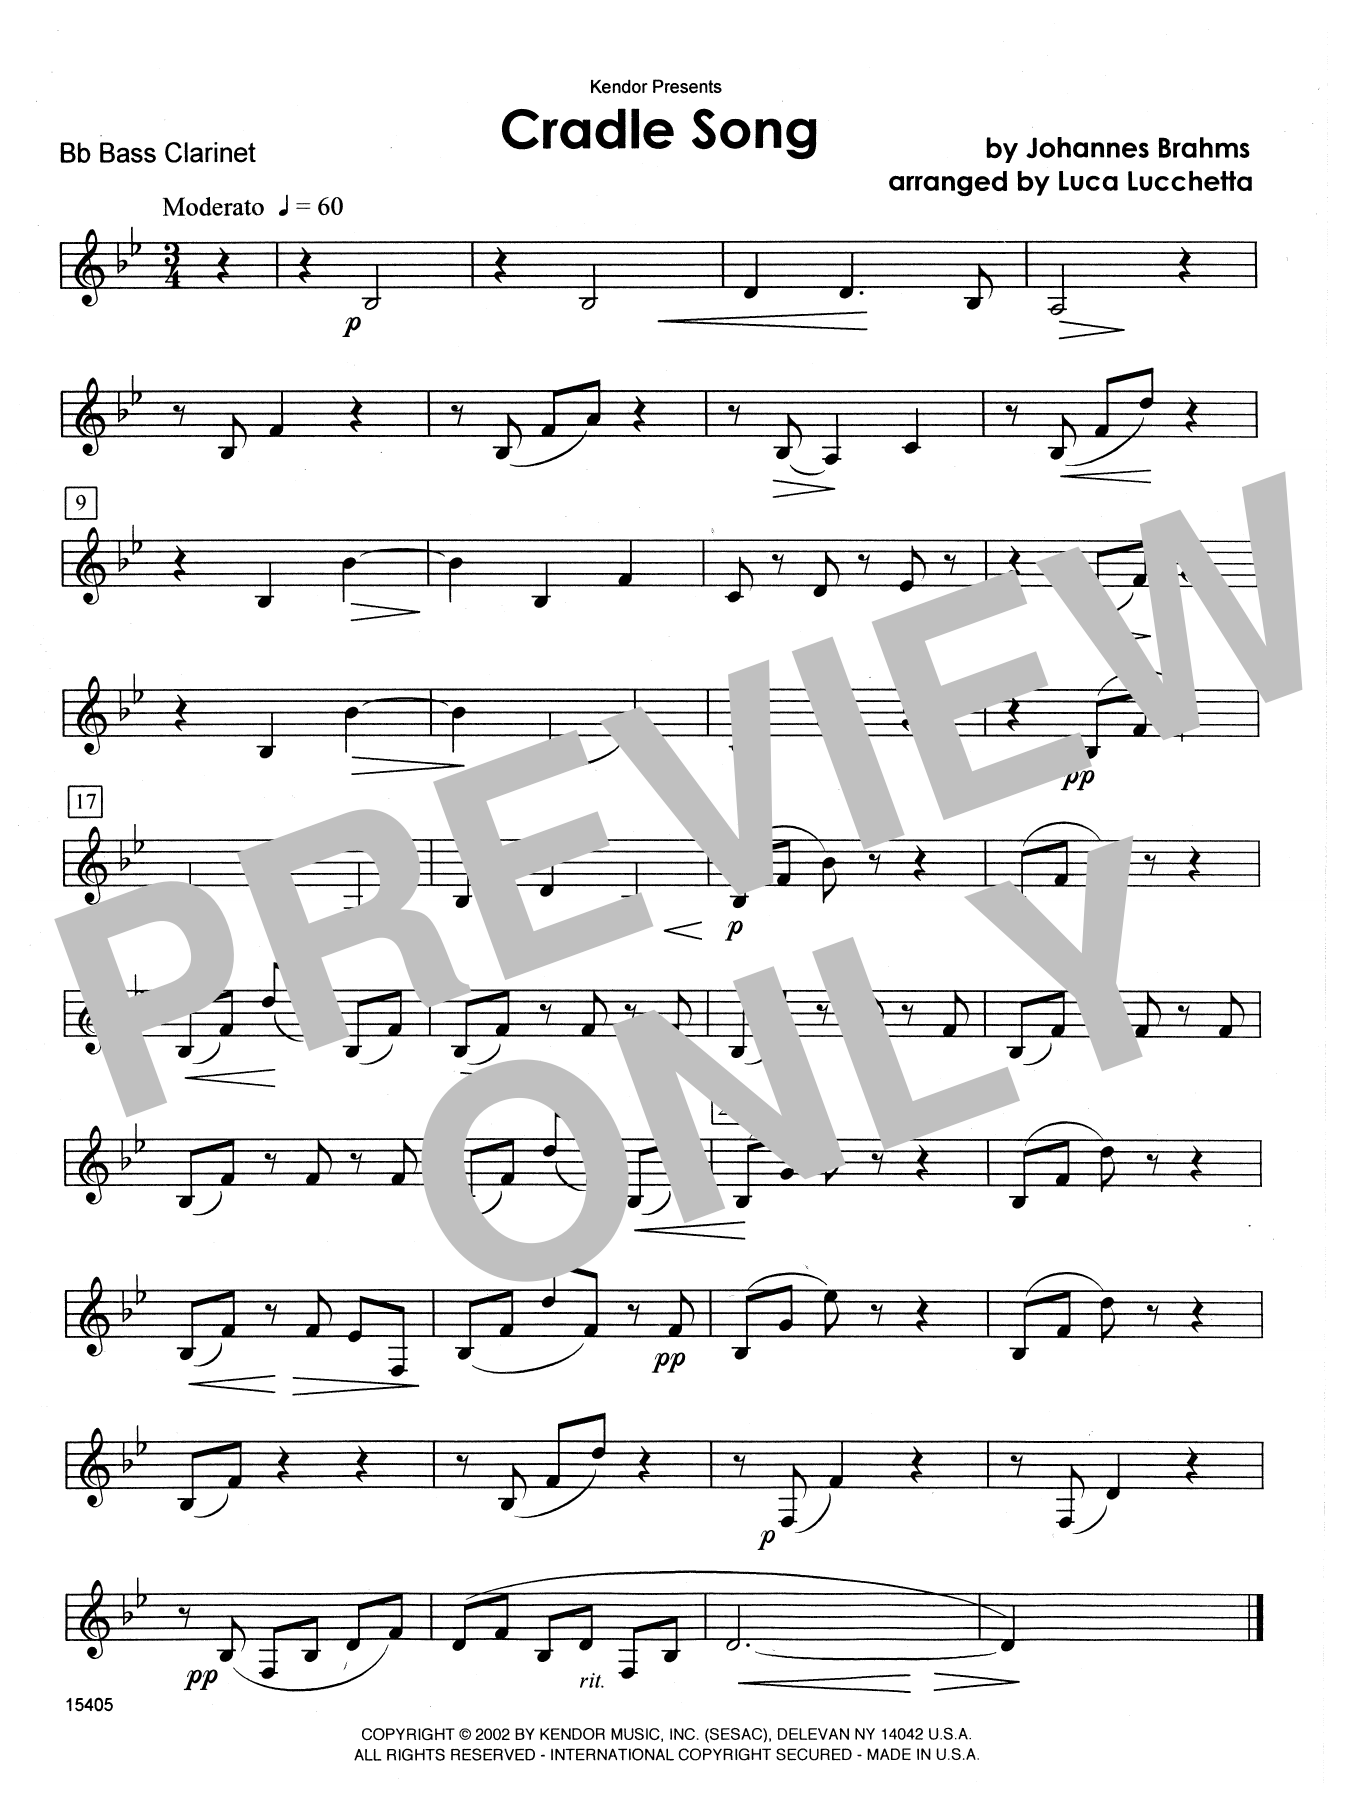 Lucchetta Cradle Song - Bb Bass Clarinet sheet music notes and chords. Download Printable PDF.